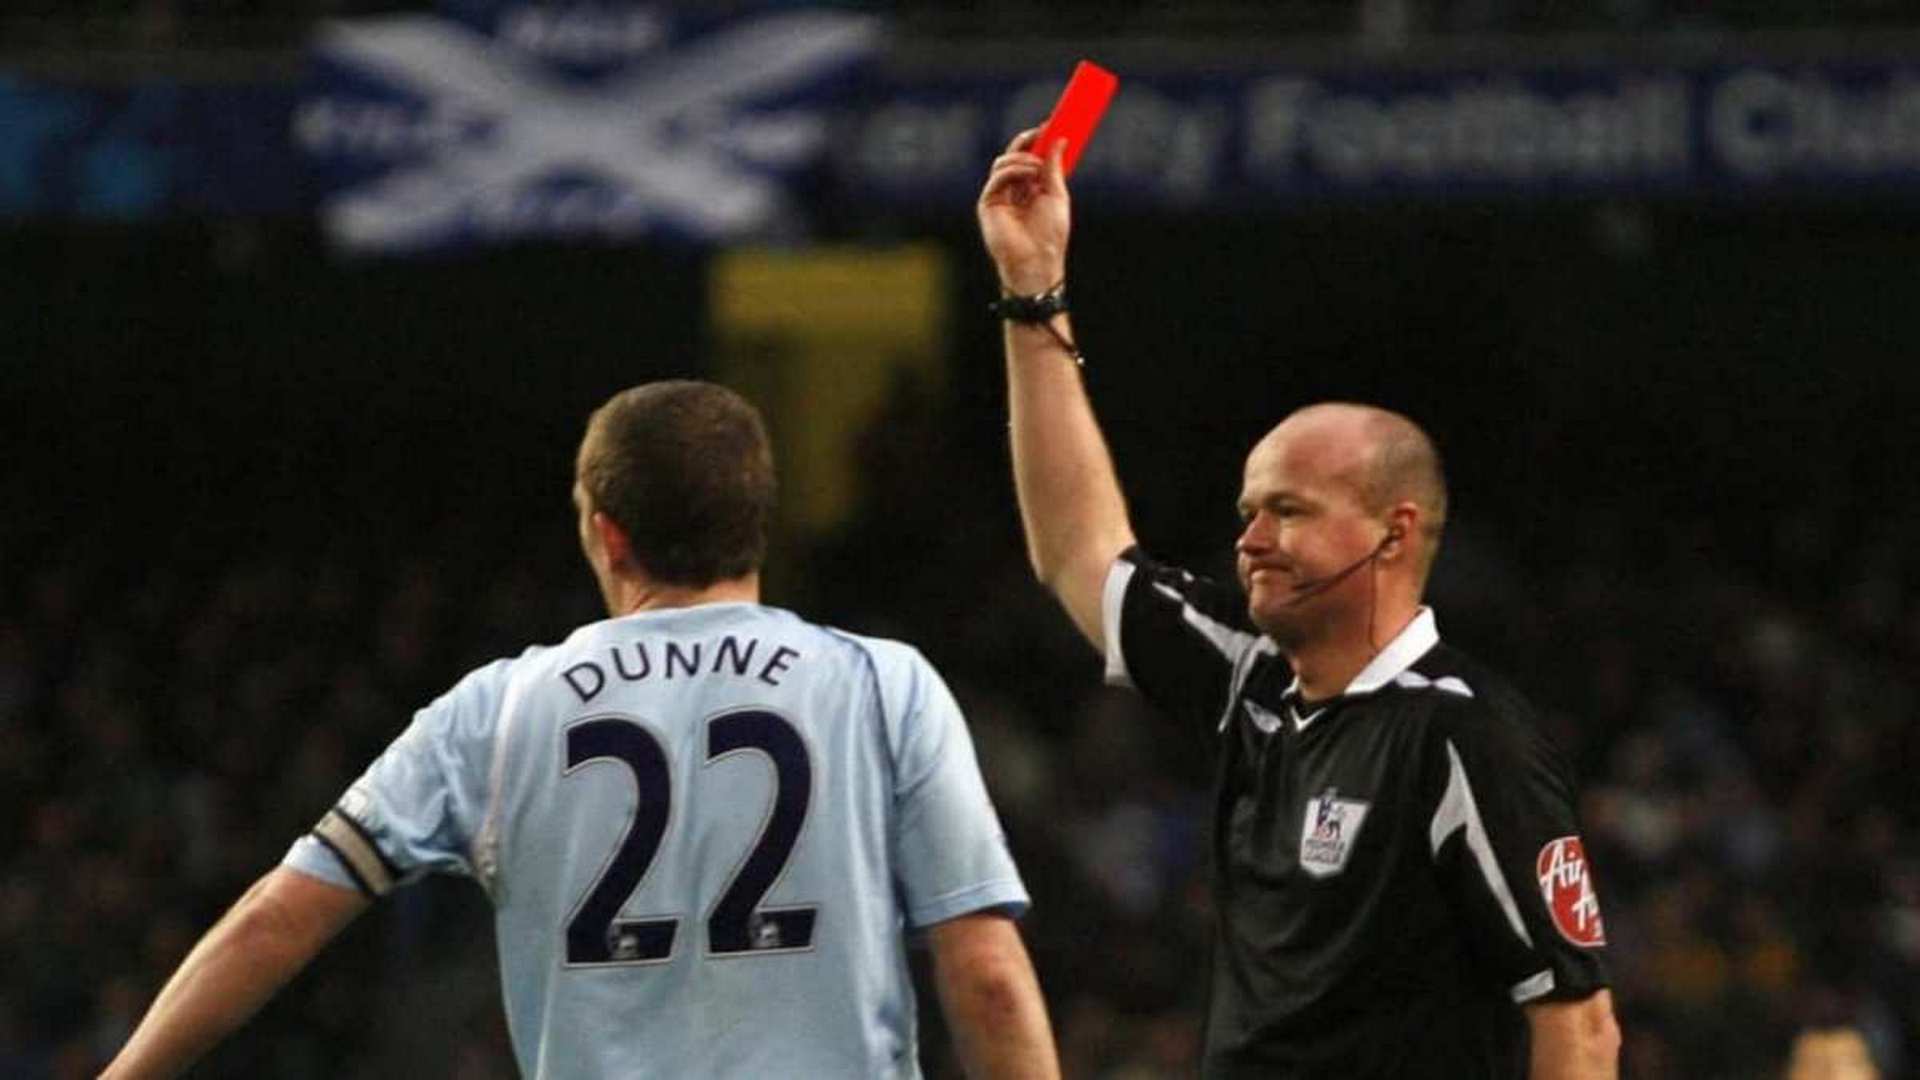 Richard Dunne - who has the most red cards in Premier League history